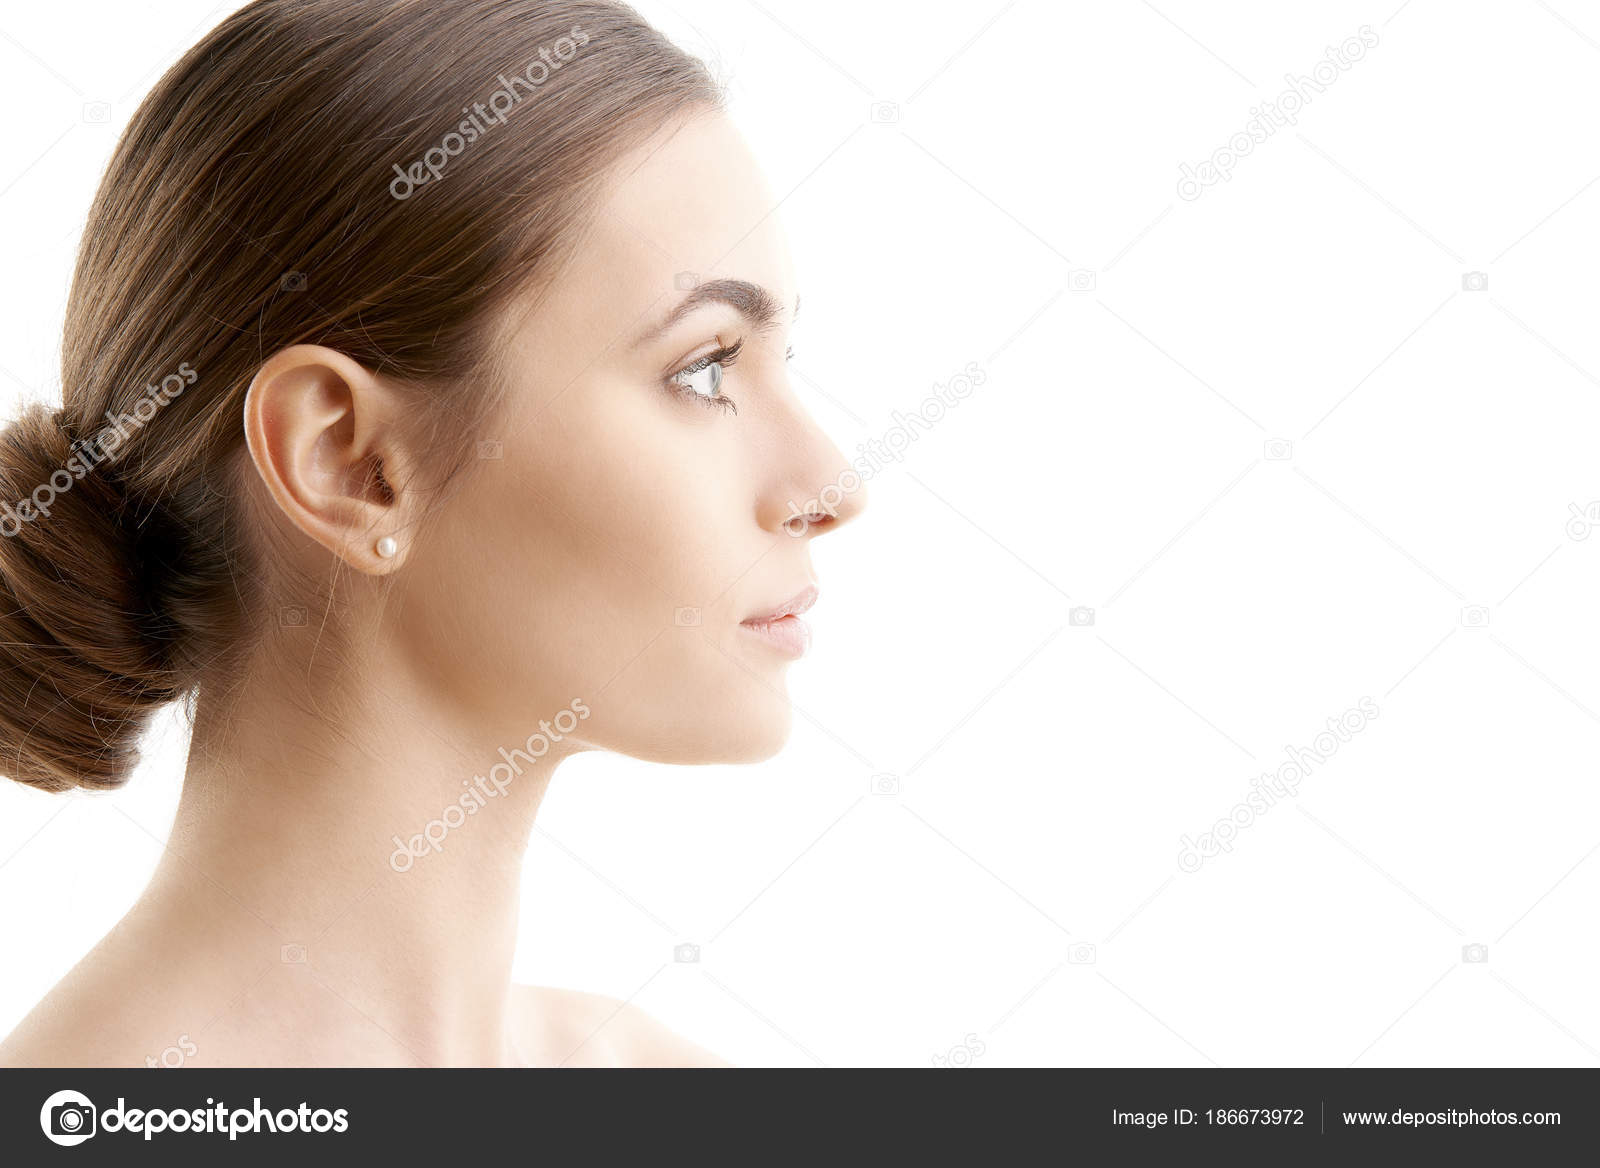 Woman Face Profile Stock Photos and Images - 123RF